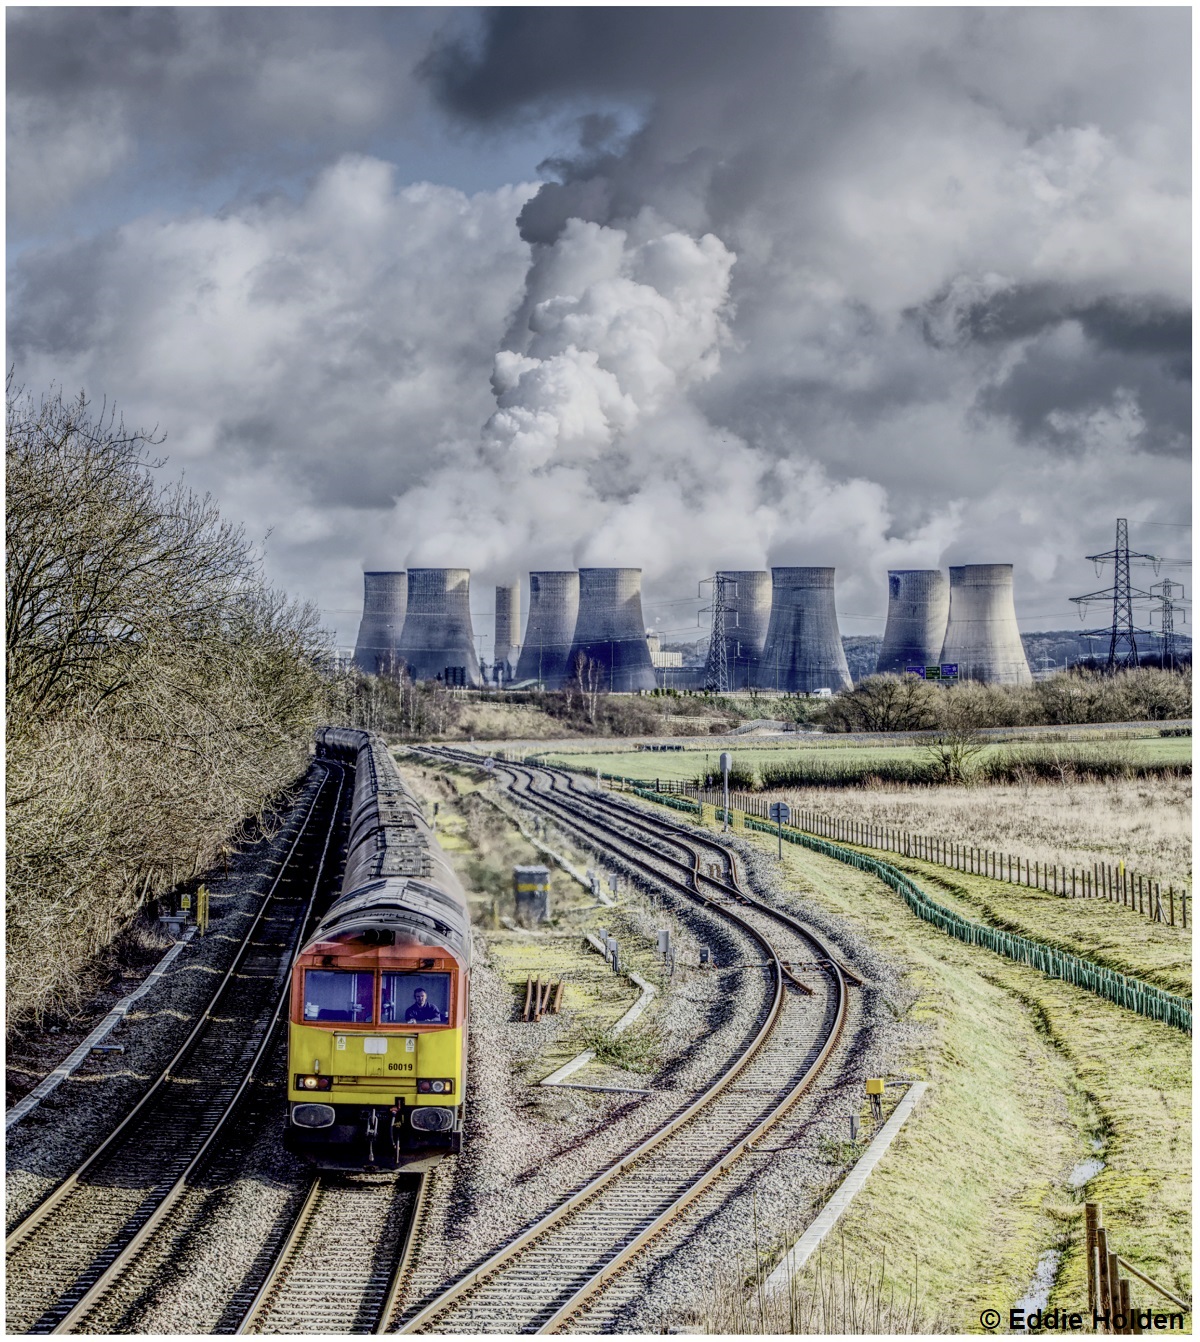 Ratcliffe Power Station is running at full capacity on 24th February 2022. It was the last coal fired power station at that time.  Cl. 60 60019 is passing Gateway West Junction with the 0702 Lyndsey Oil Refinery to Kingsbury Oil Sidings. Eddie Holden